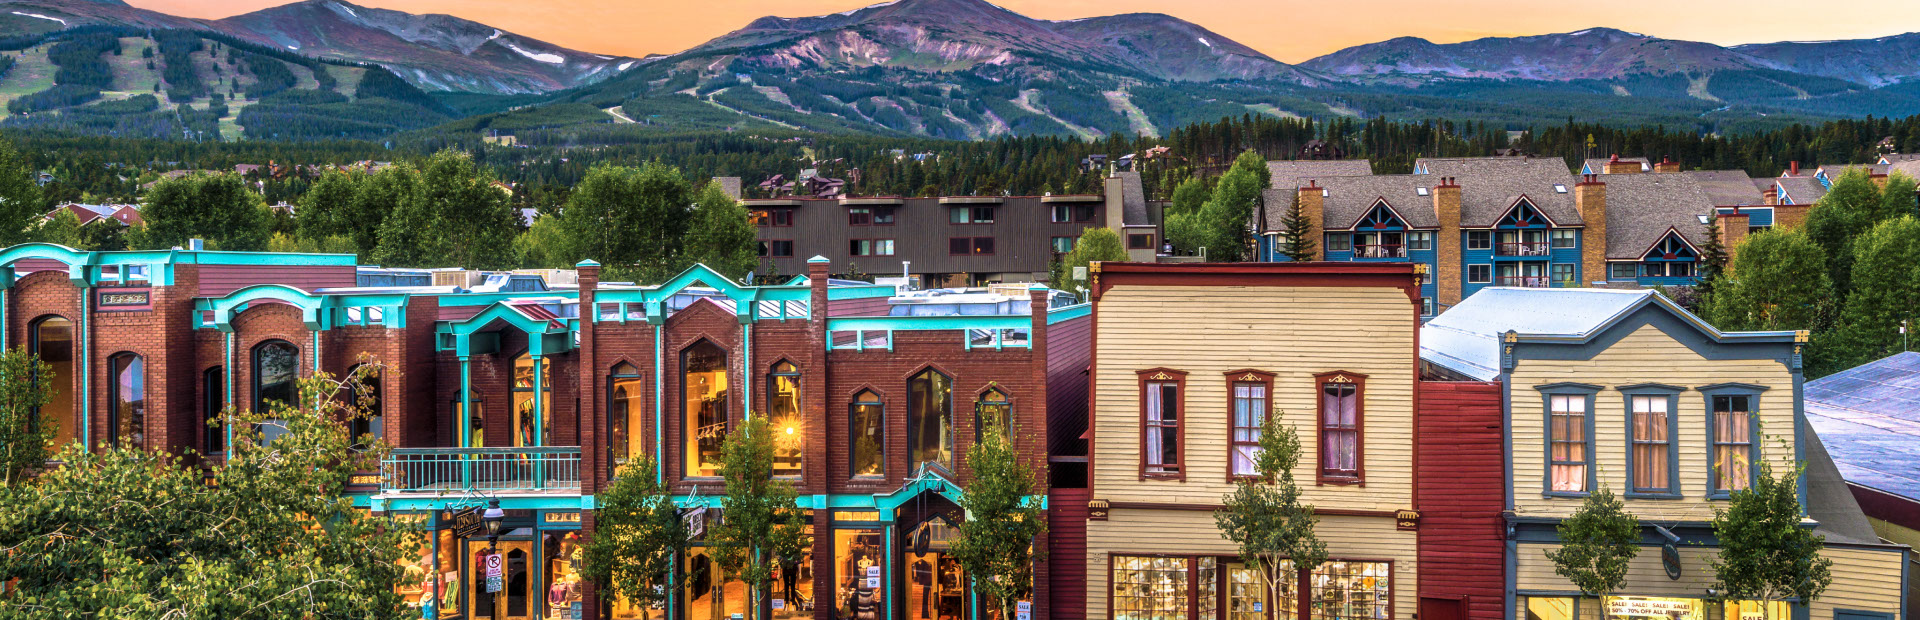 Row of buildings on Main Street in Breckenridge Colorado at sunset